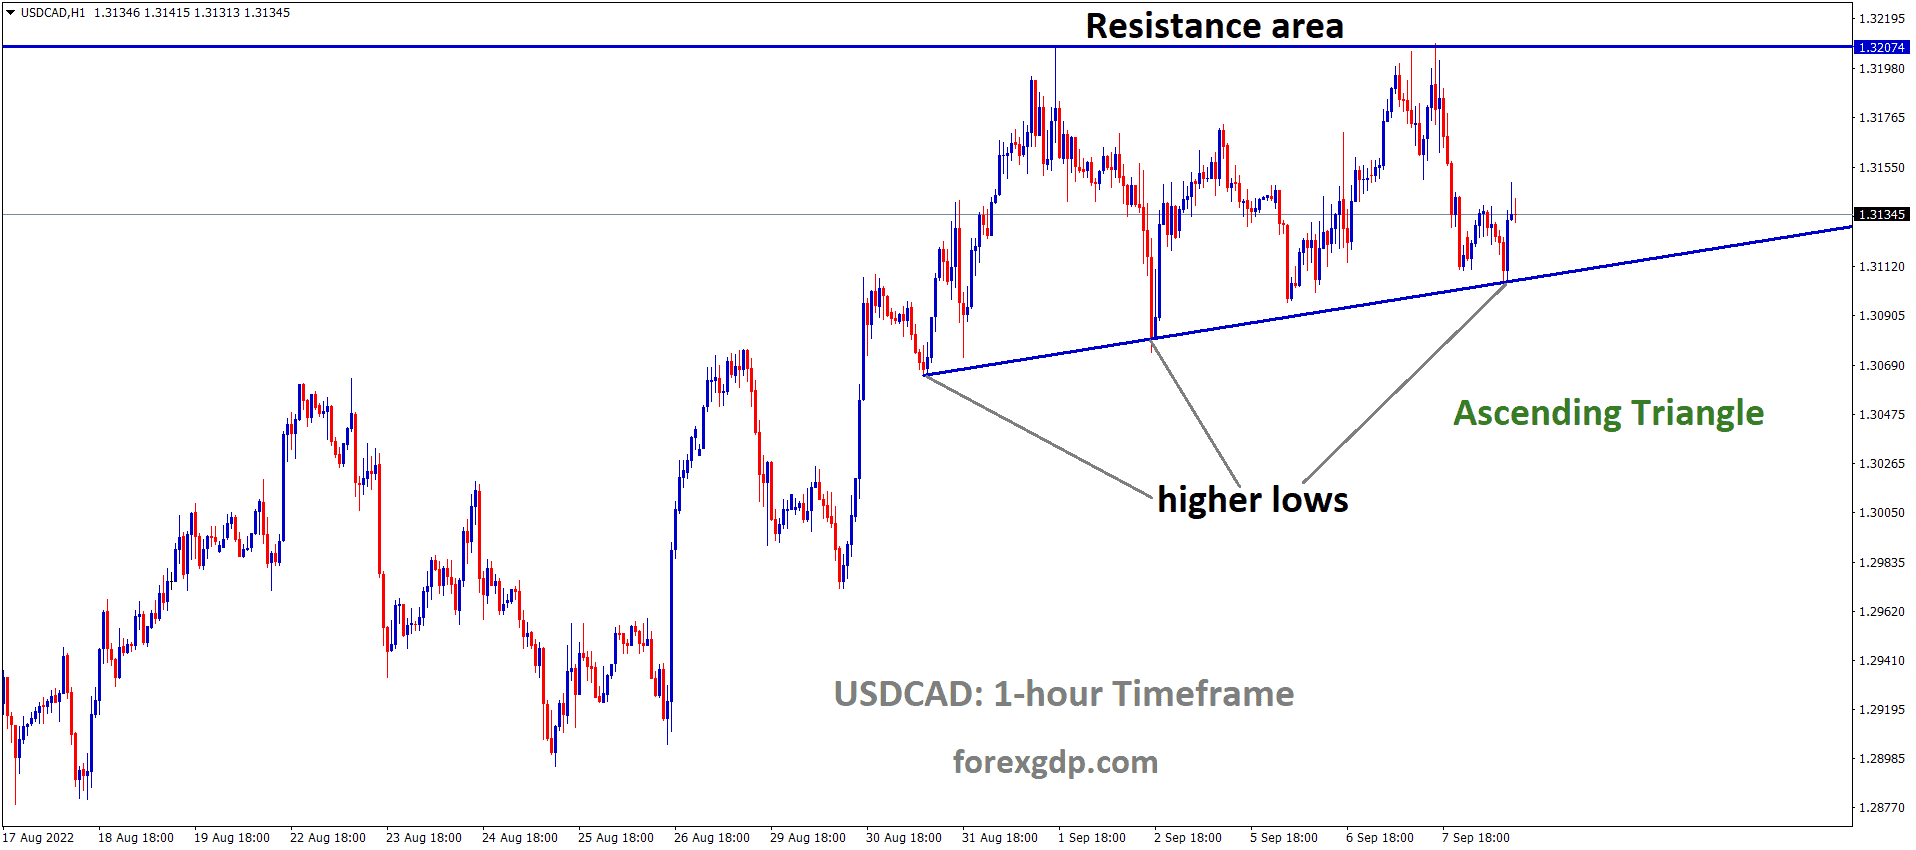 USDCAD is moving in an Ascending triangle pattern and the market has rebounded from the higher low area of the pattern.